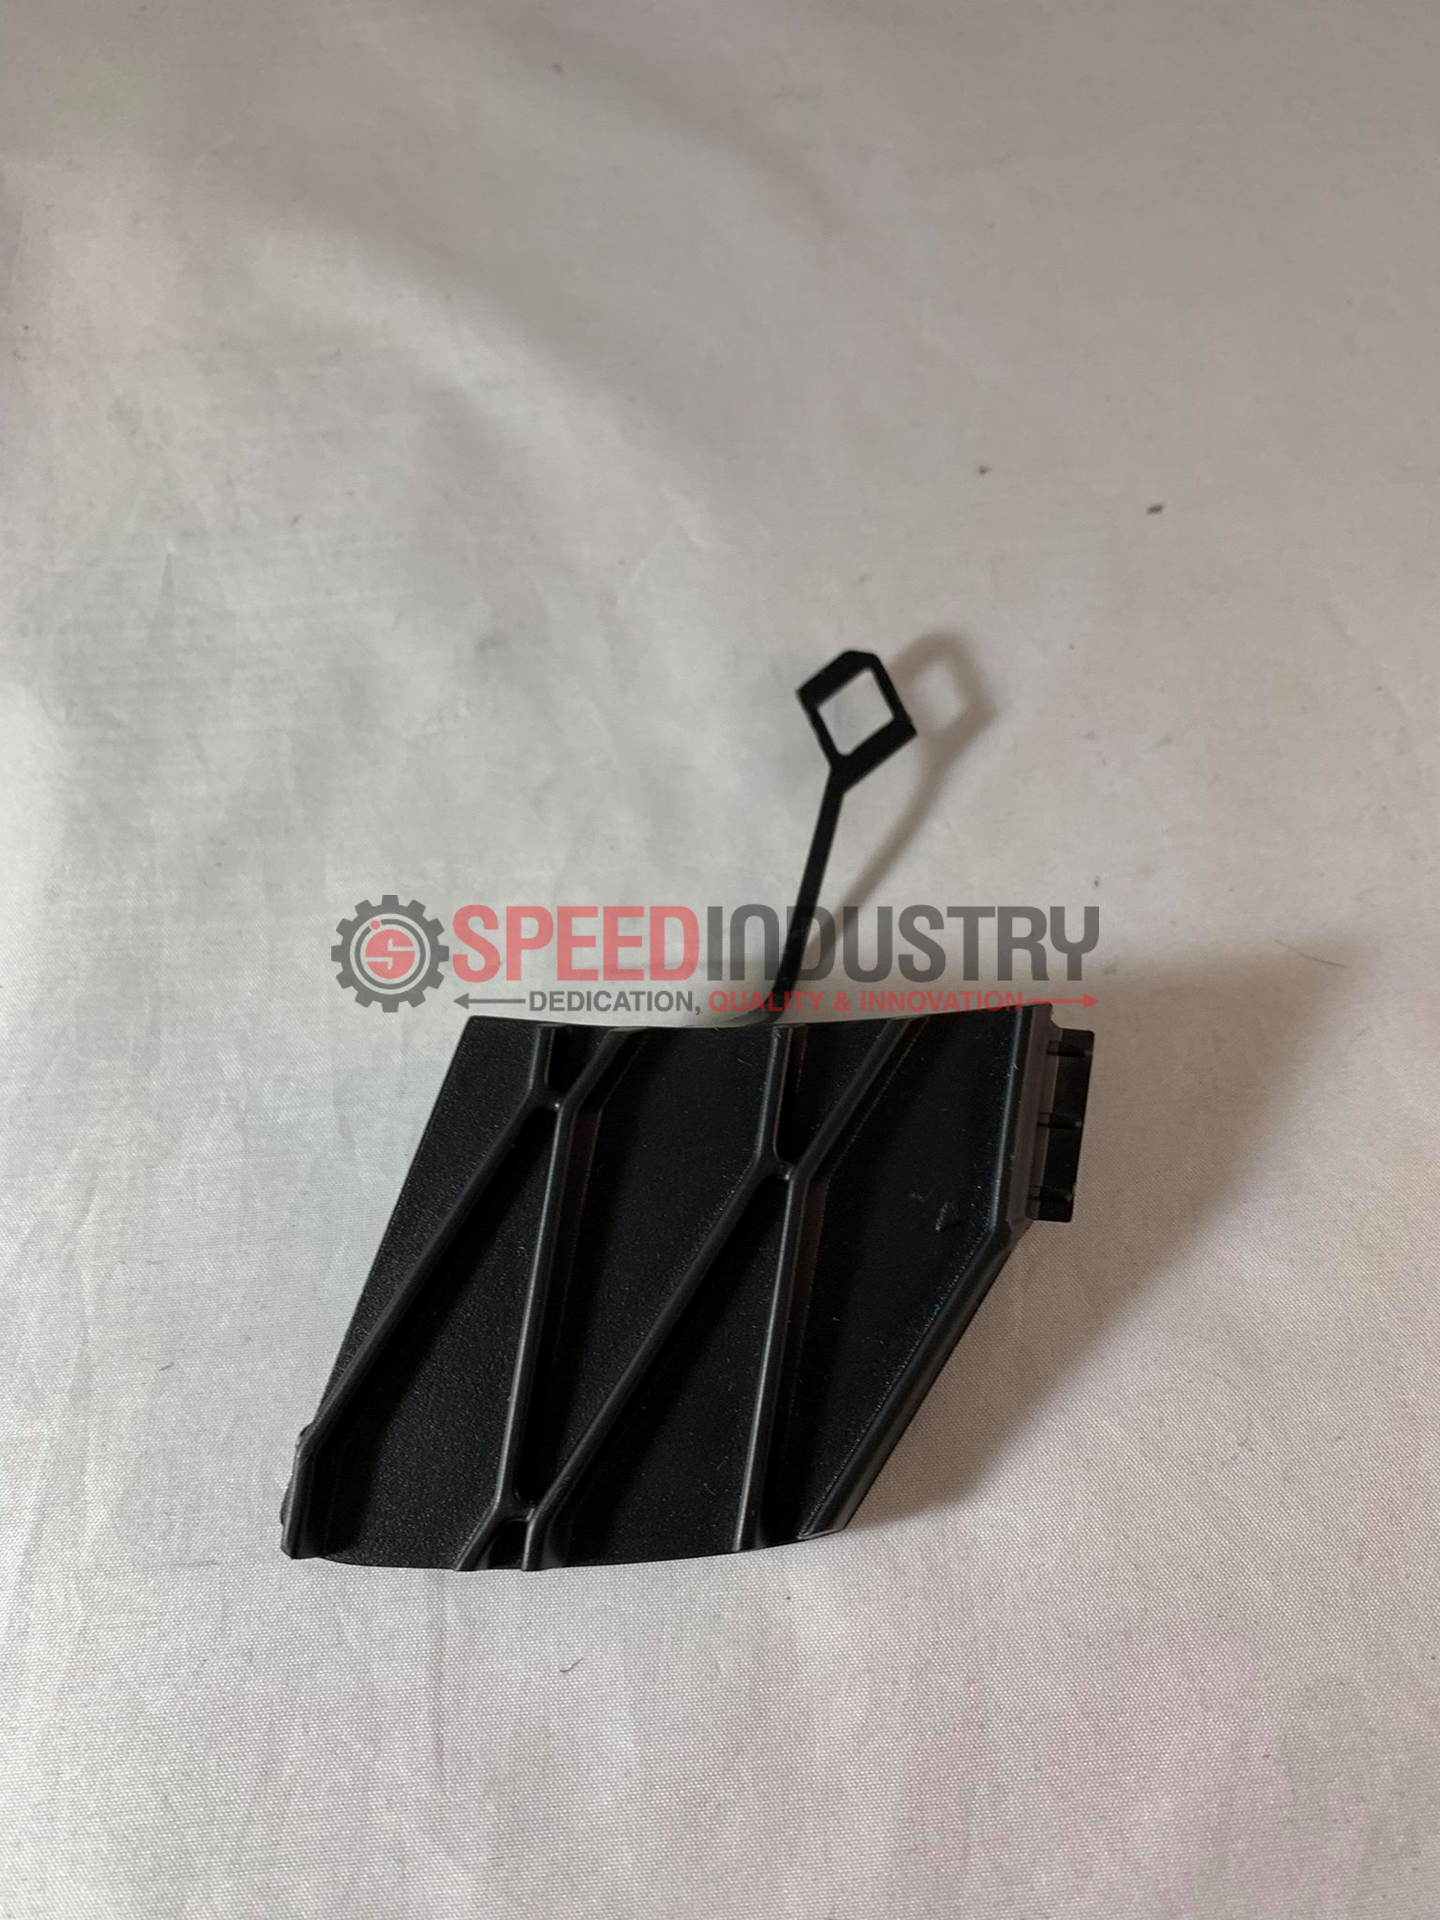 OEM Front Tow Hook Cover- A90 MKV Supra GR 2020+. Speed Industry